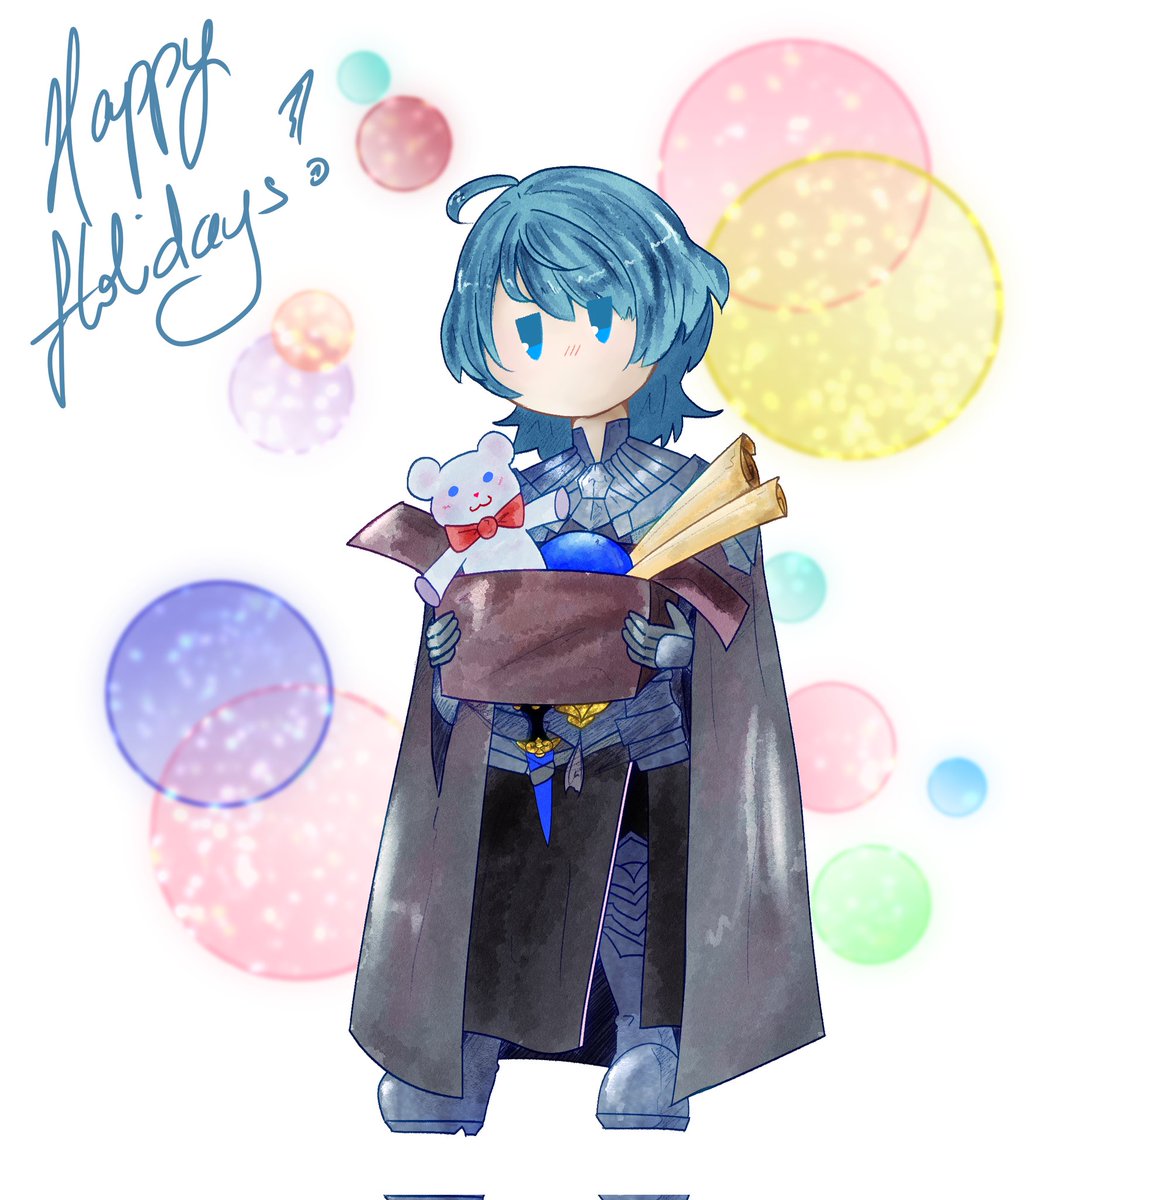 Secret Anna gift with M!Byleth for green_starman Event hosted by @fecompendium